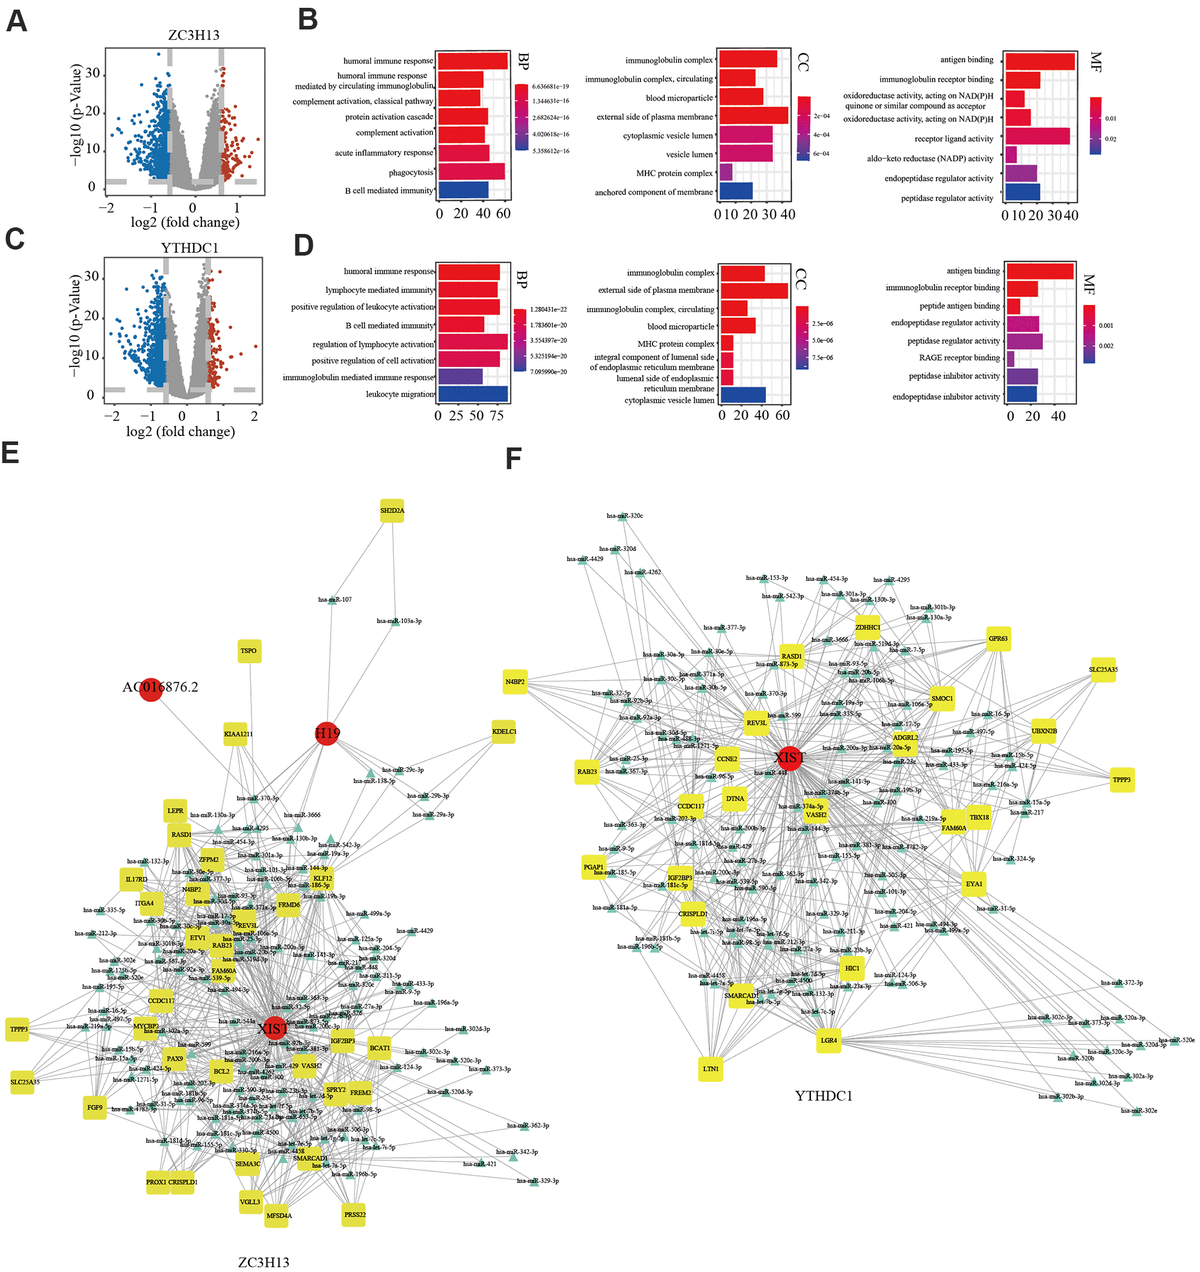 Potential regulatory mechanism of ZC3H13 and YTHDC1 dysregulation in endometrial cancer. (A) Volcano map showing the differential mRNA, microRNA, and lncRNA expression in patients with low ZC3H13 expression. An absolute log2-fold change (FC) > 1.5 and FDR-adjusted P B) The bar graph shows that ZC3H13-regulated expression was enriched for various GO terms. (C) Volcano plot showing differentially expressed transcripts in patients with low YTHDC1 expression. (D) The bar graph shows that YTHDC1-regulated expression was enriched for various GO terms. (E, F) The ceRNA regulatory network in patients with low expression of ZC3H13 and YTHDC1. Red indicates lncRNA; yellow indicates mRNA; blue indicates microRNA.